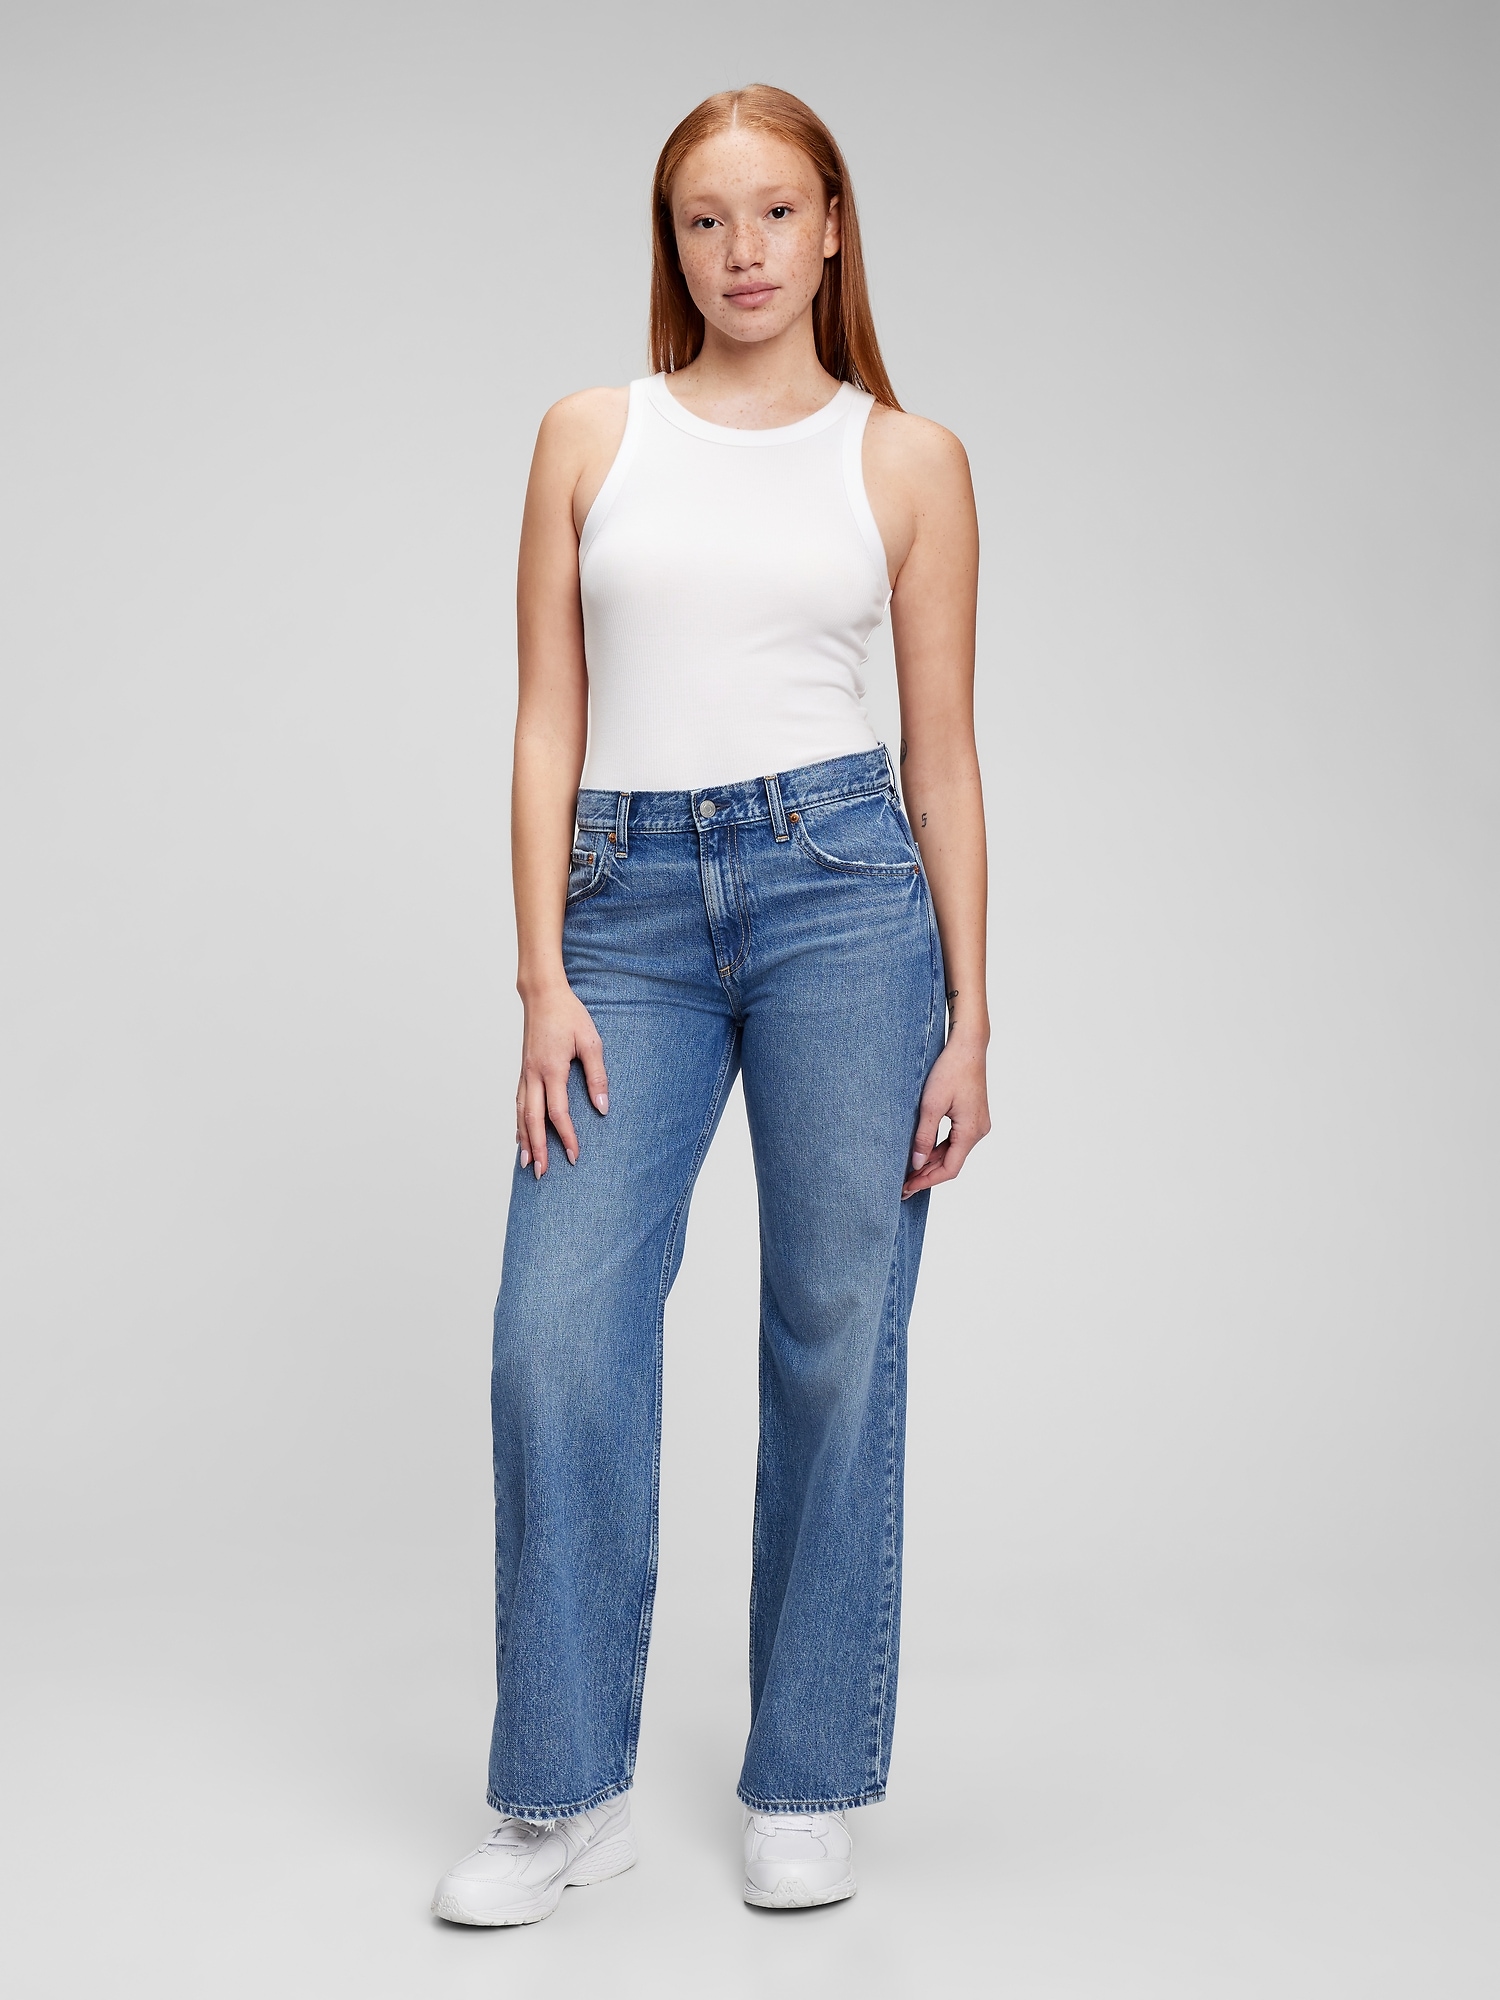 GAP, Jeans, Gap Low Rise Cropped Stretch Jeans 6 Regular